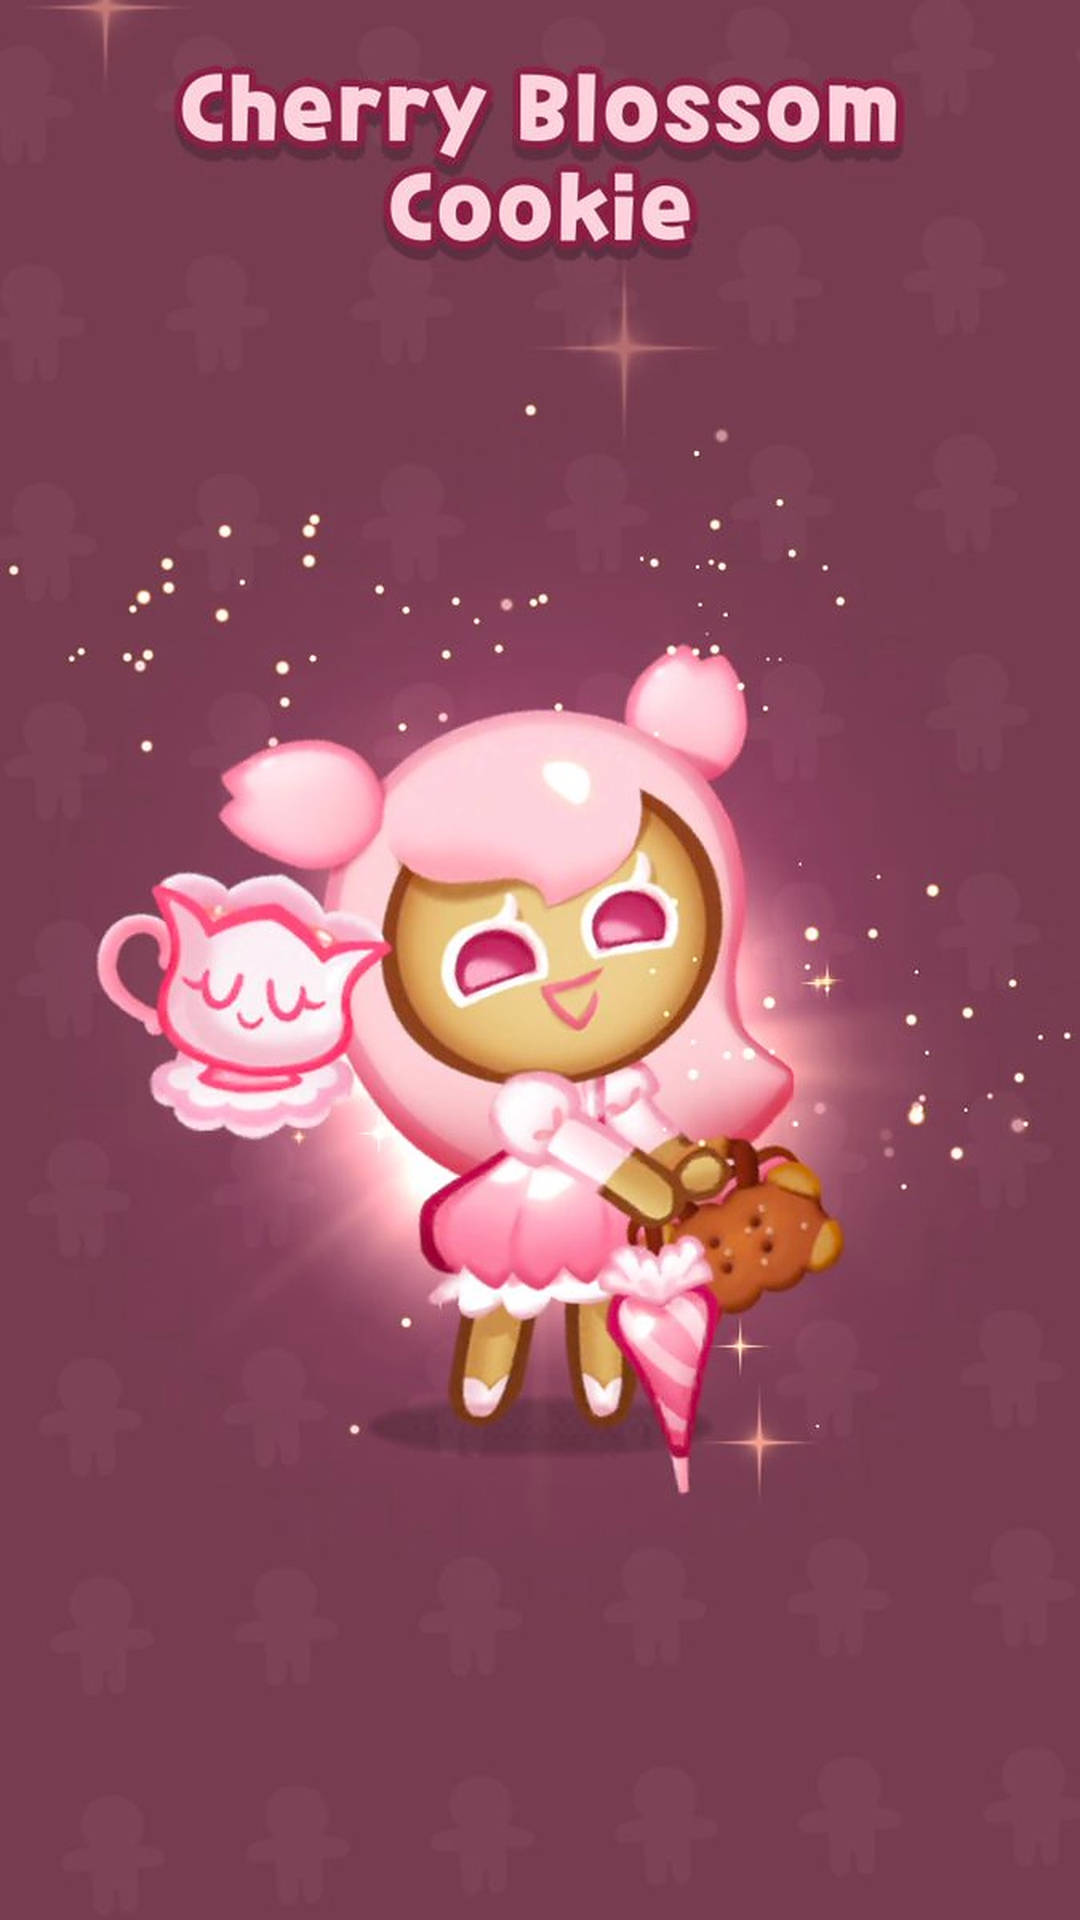 Adventurous Cherry Blossom Cookie in Action Wallpaper